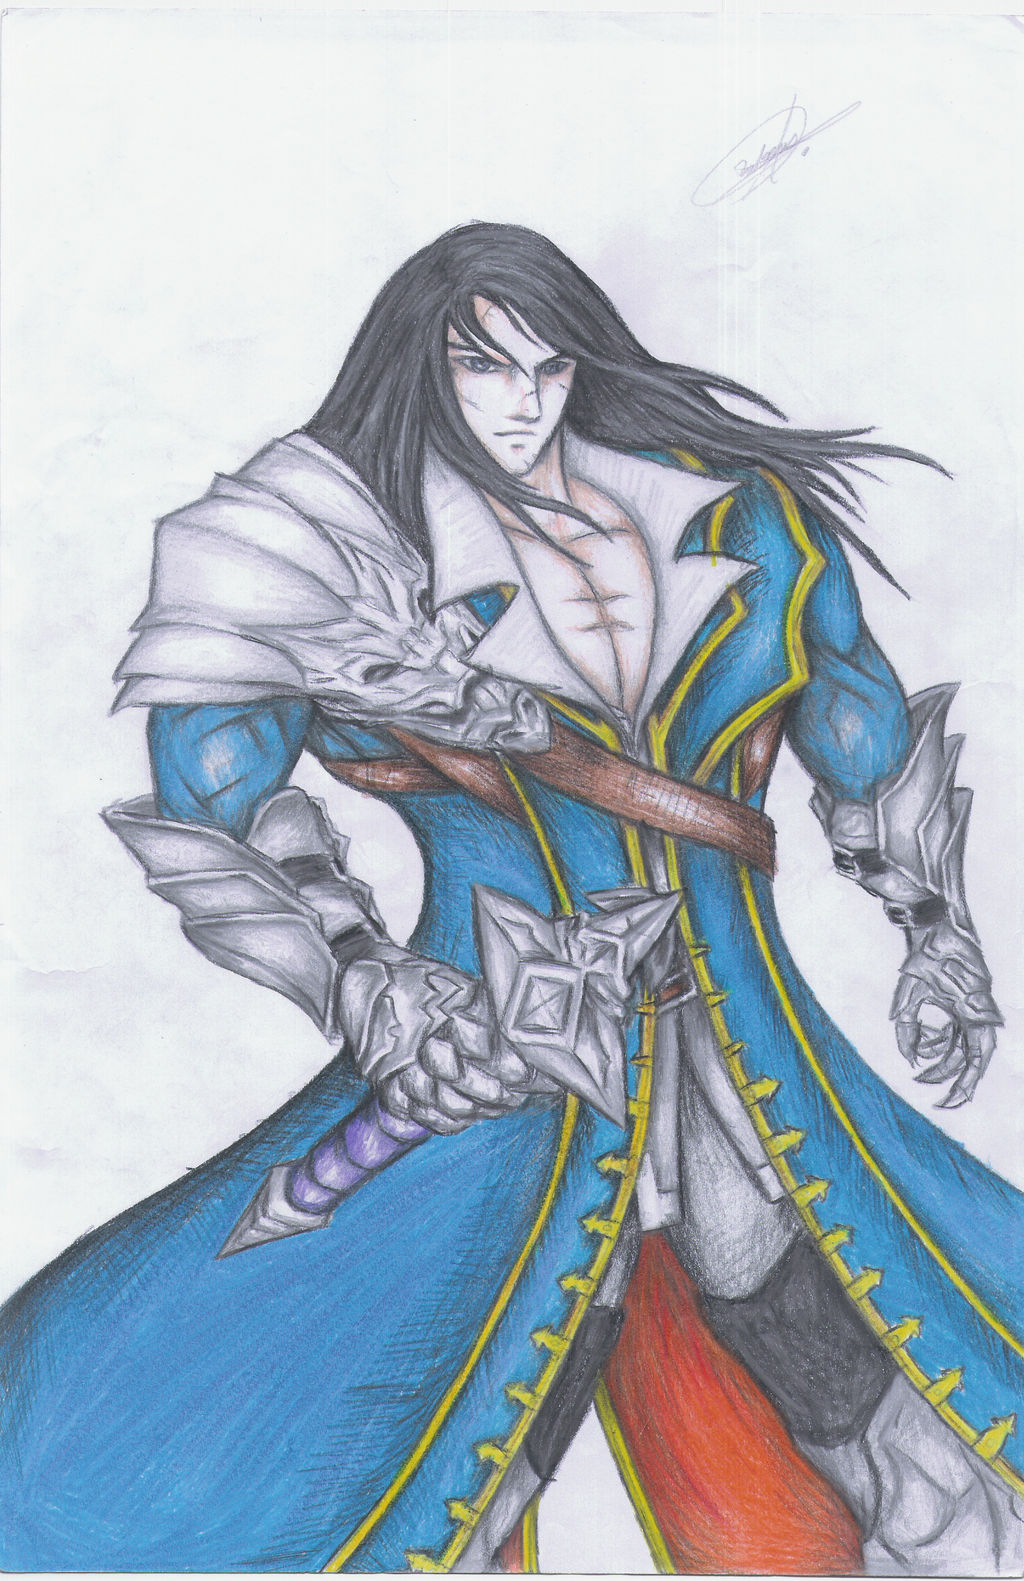 Castlevania Lords of Shadow Mirror Of Fate by Rubens77belmont on DeviantArt